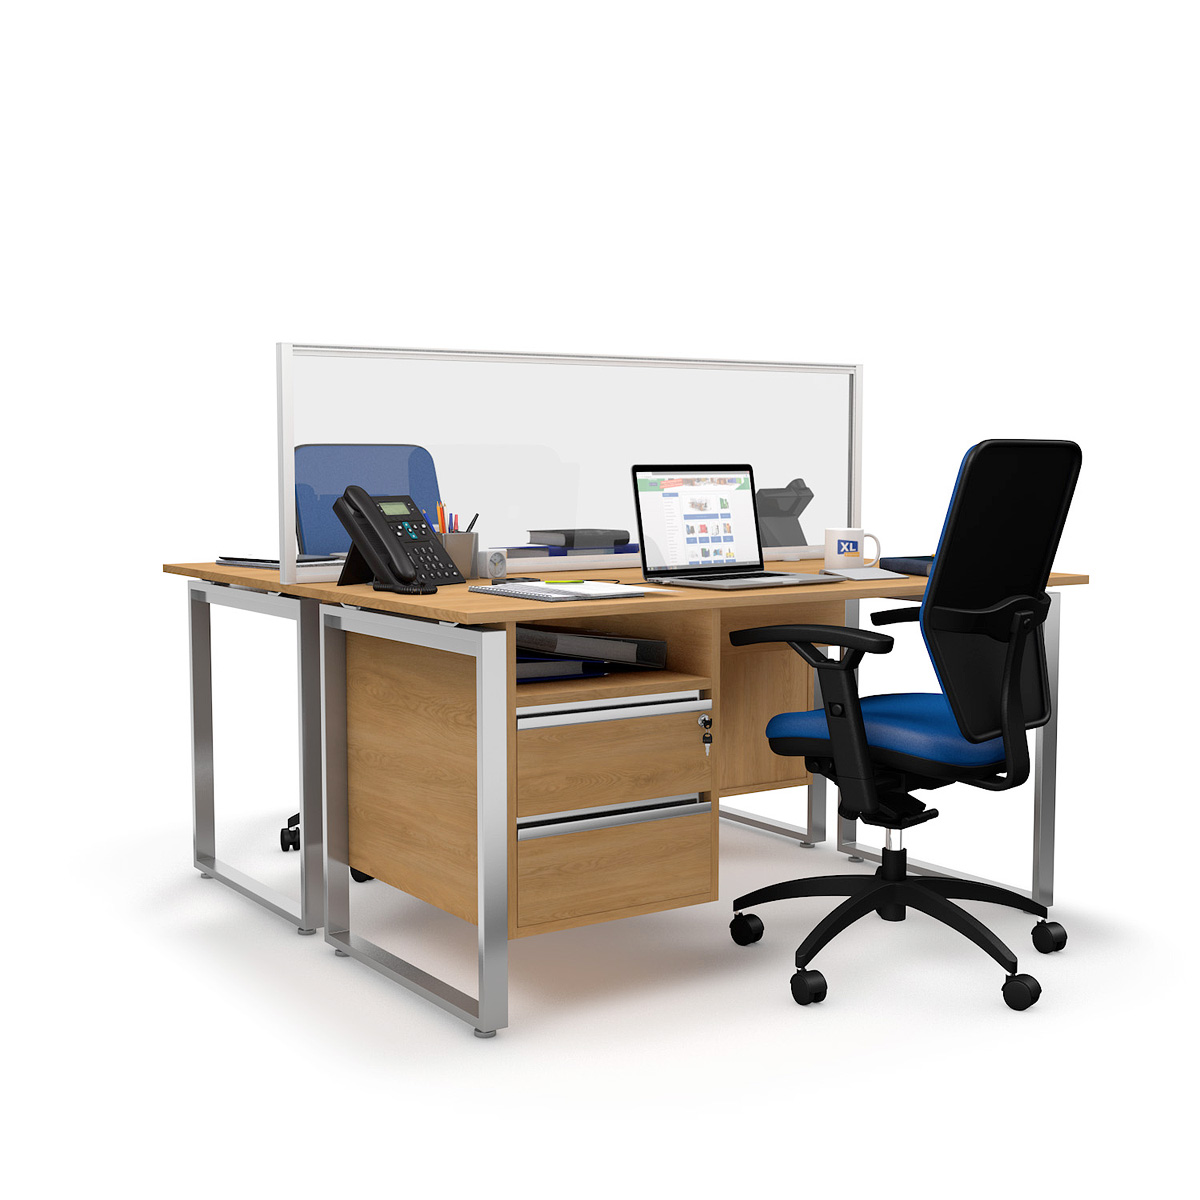 FRONTIER® Glazed Office Screen Desk Dividers With White Aluminium Frame